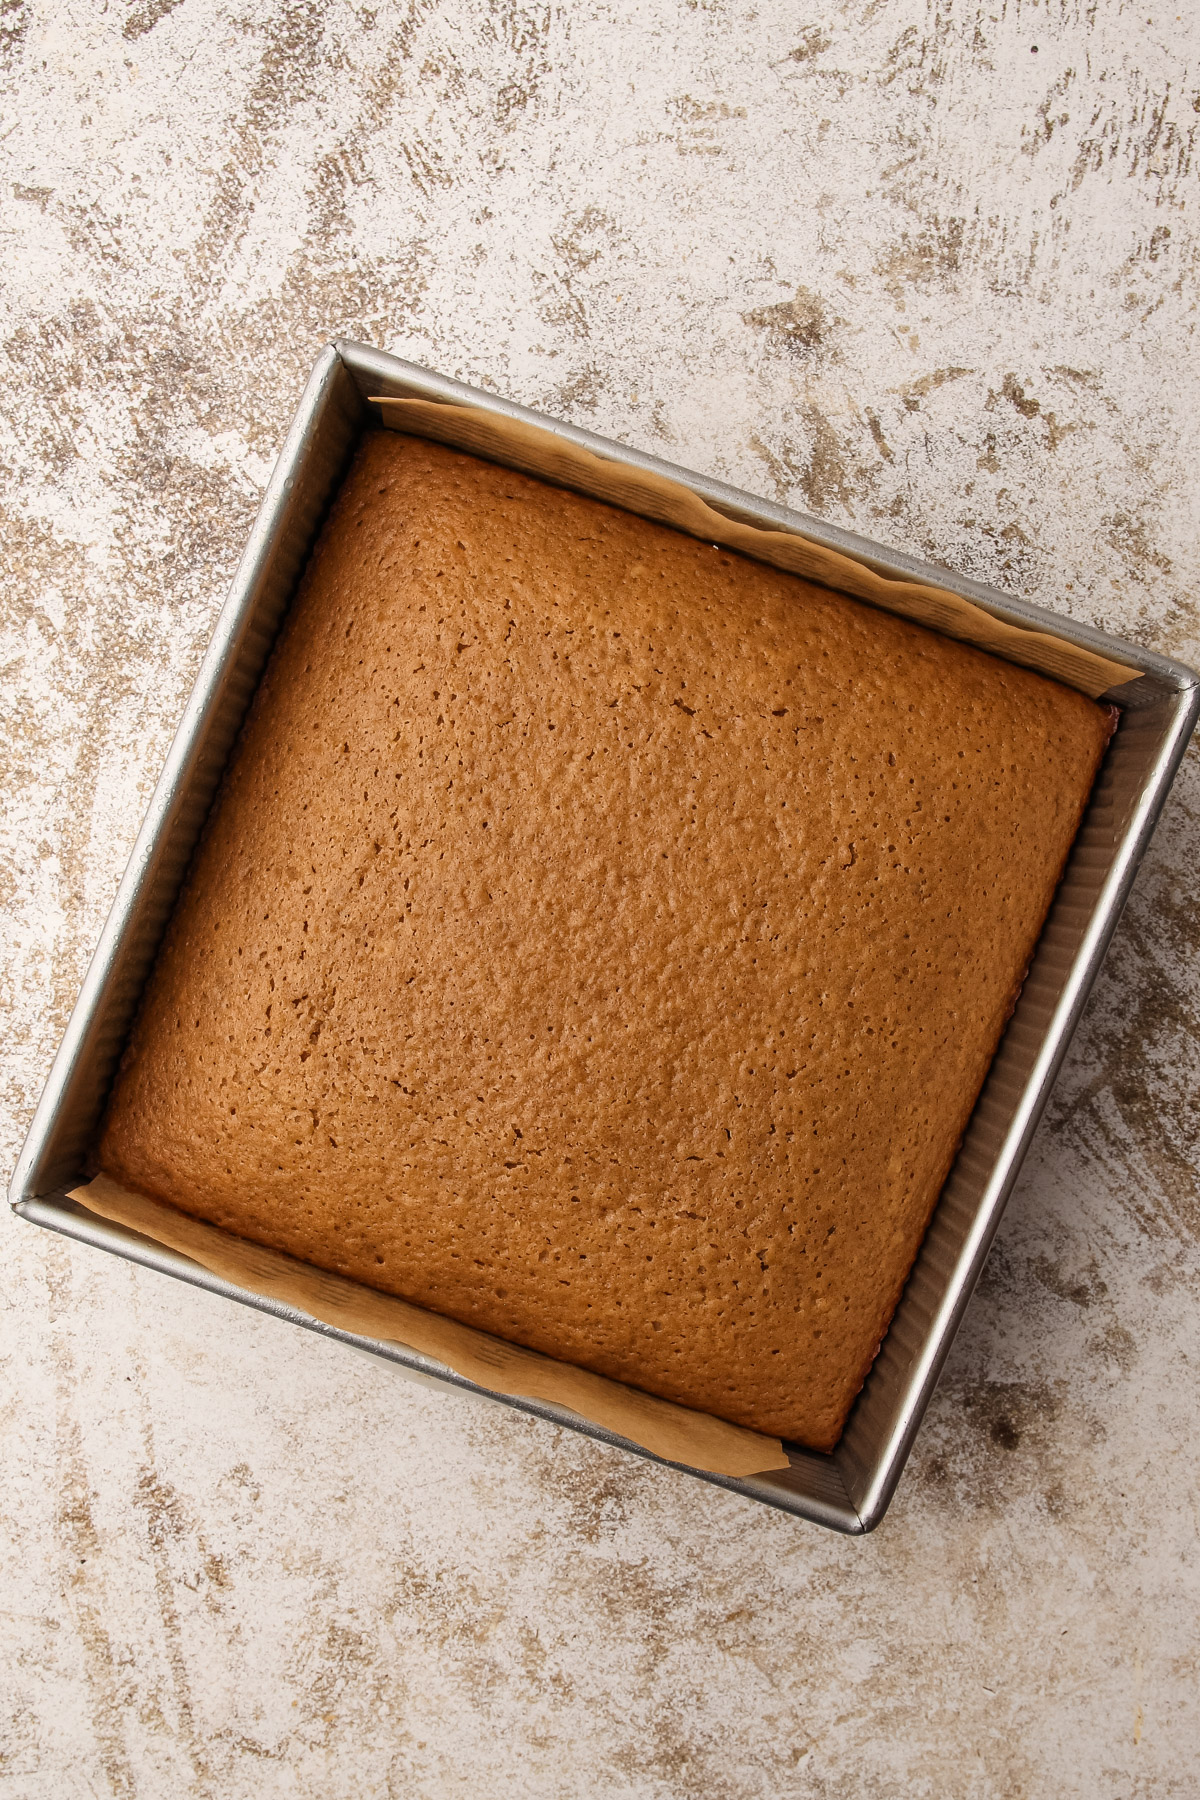 A fully baked cake in a parchment-lined 8-inch square metal baking pan.